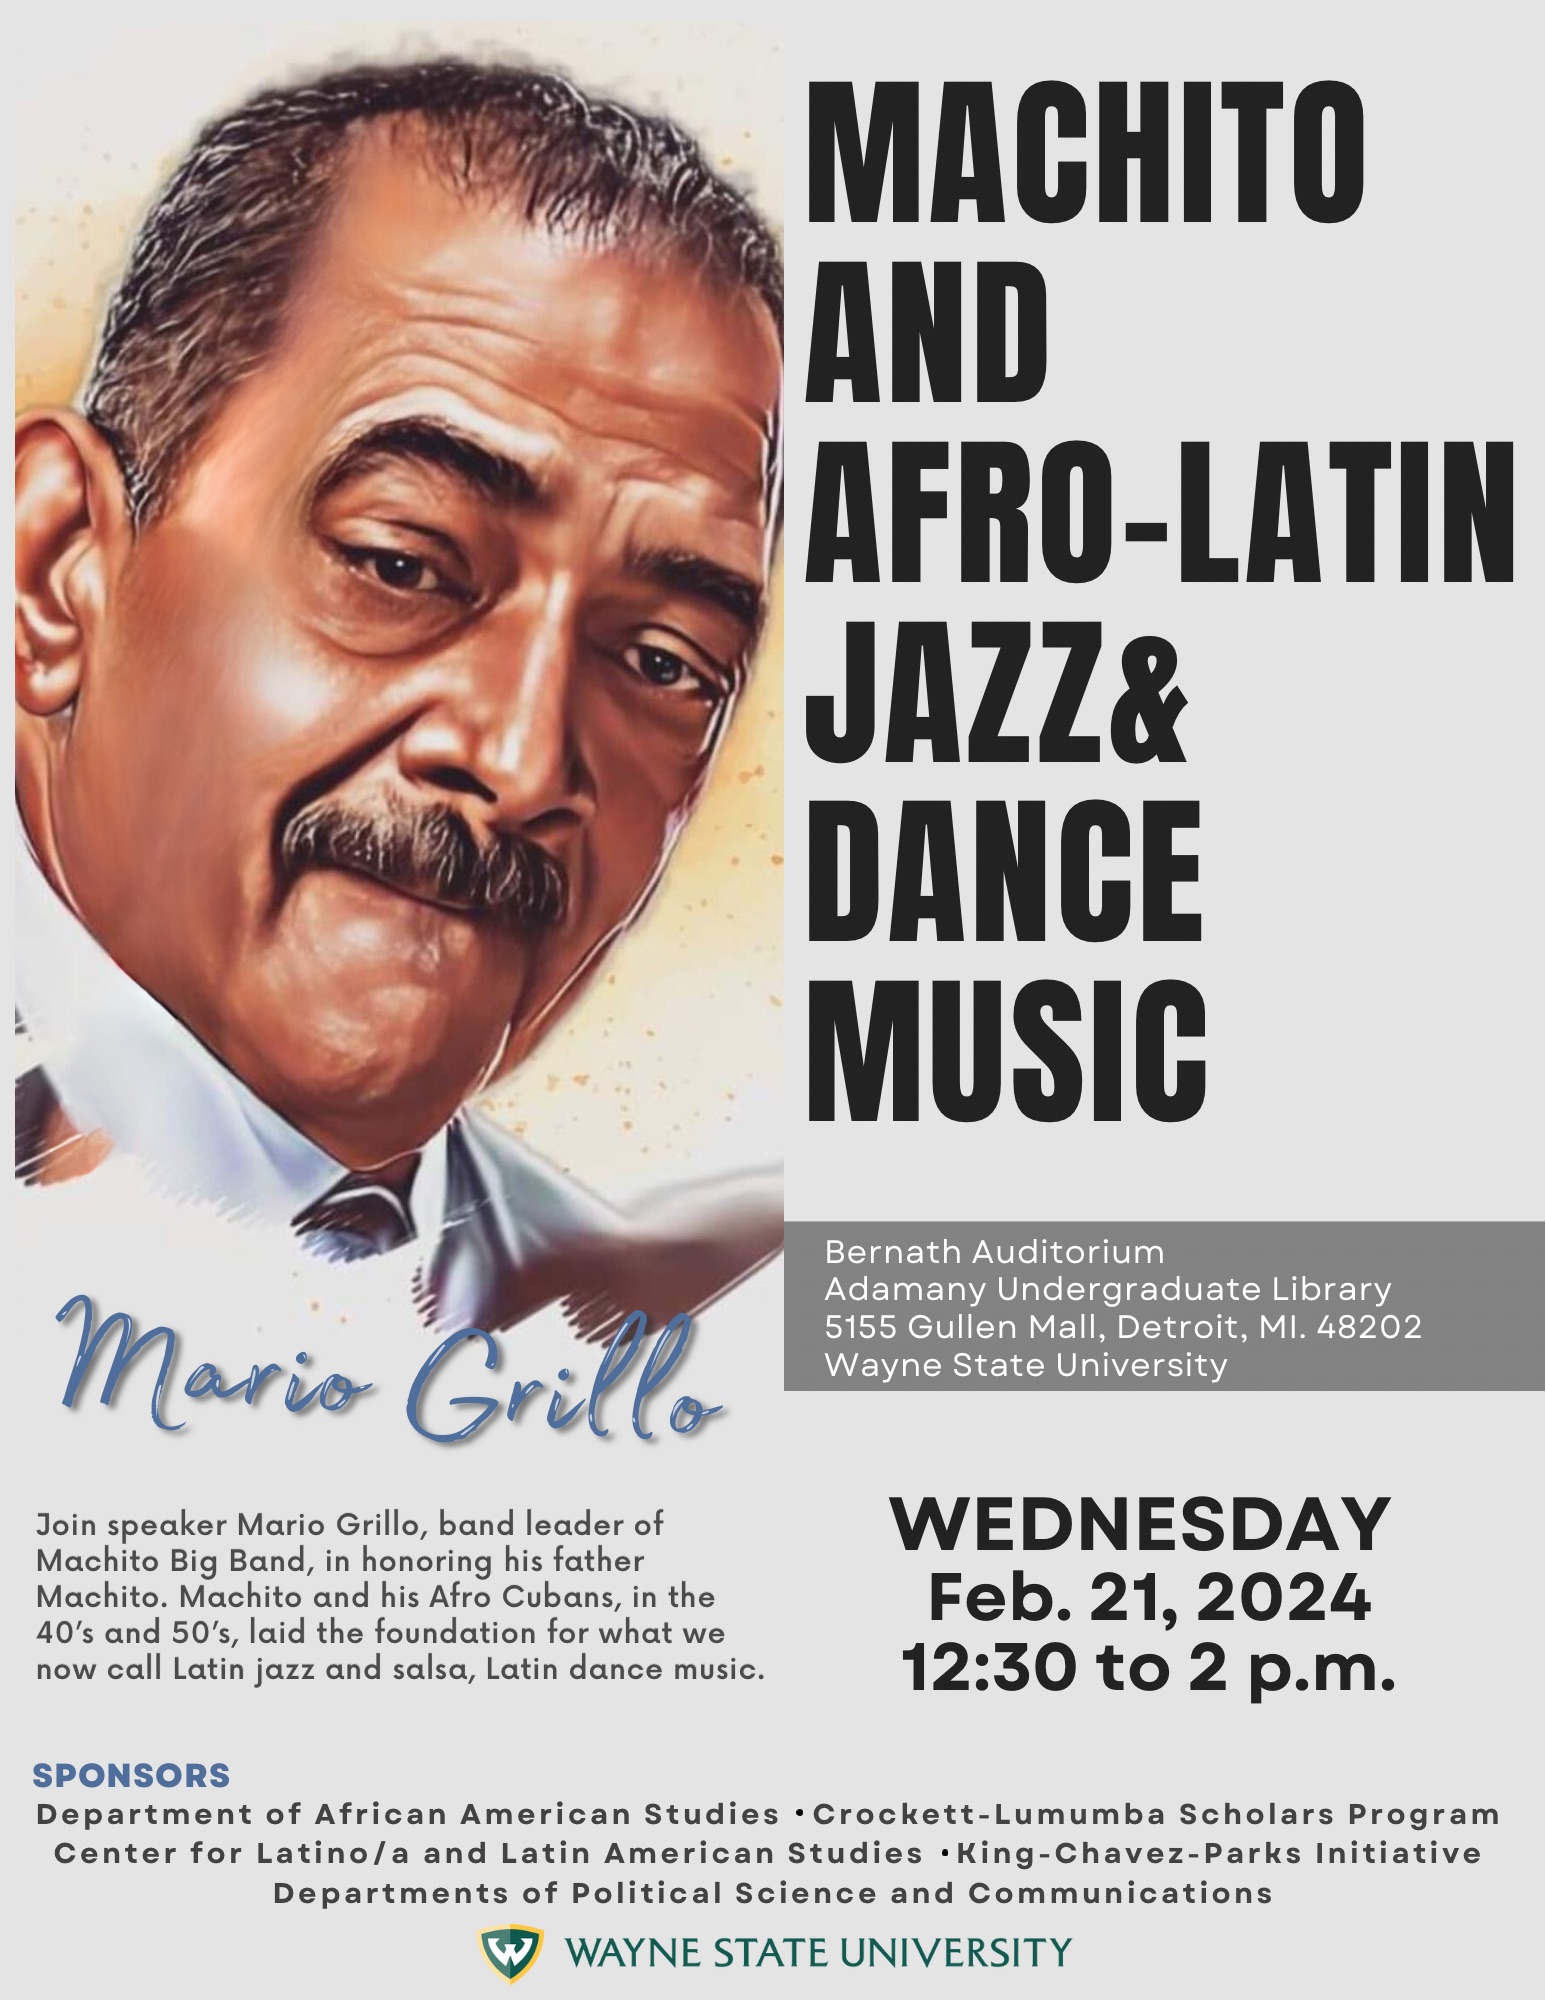 Mario Grillo on the Machito influence, Afro-Latin jazz and dance music